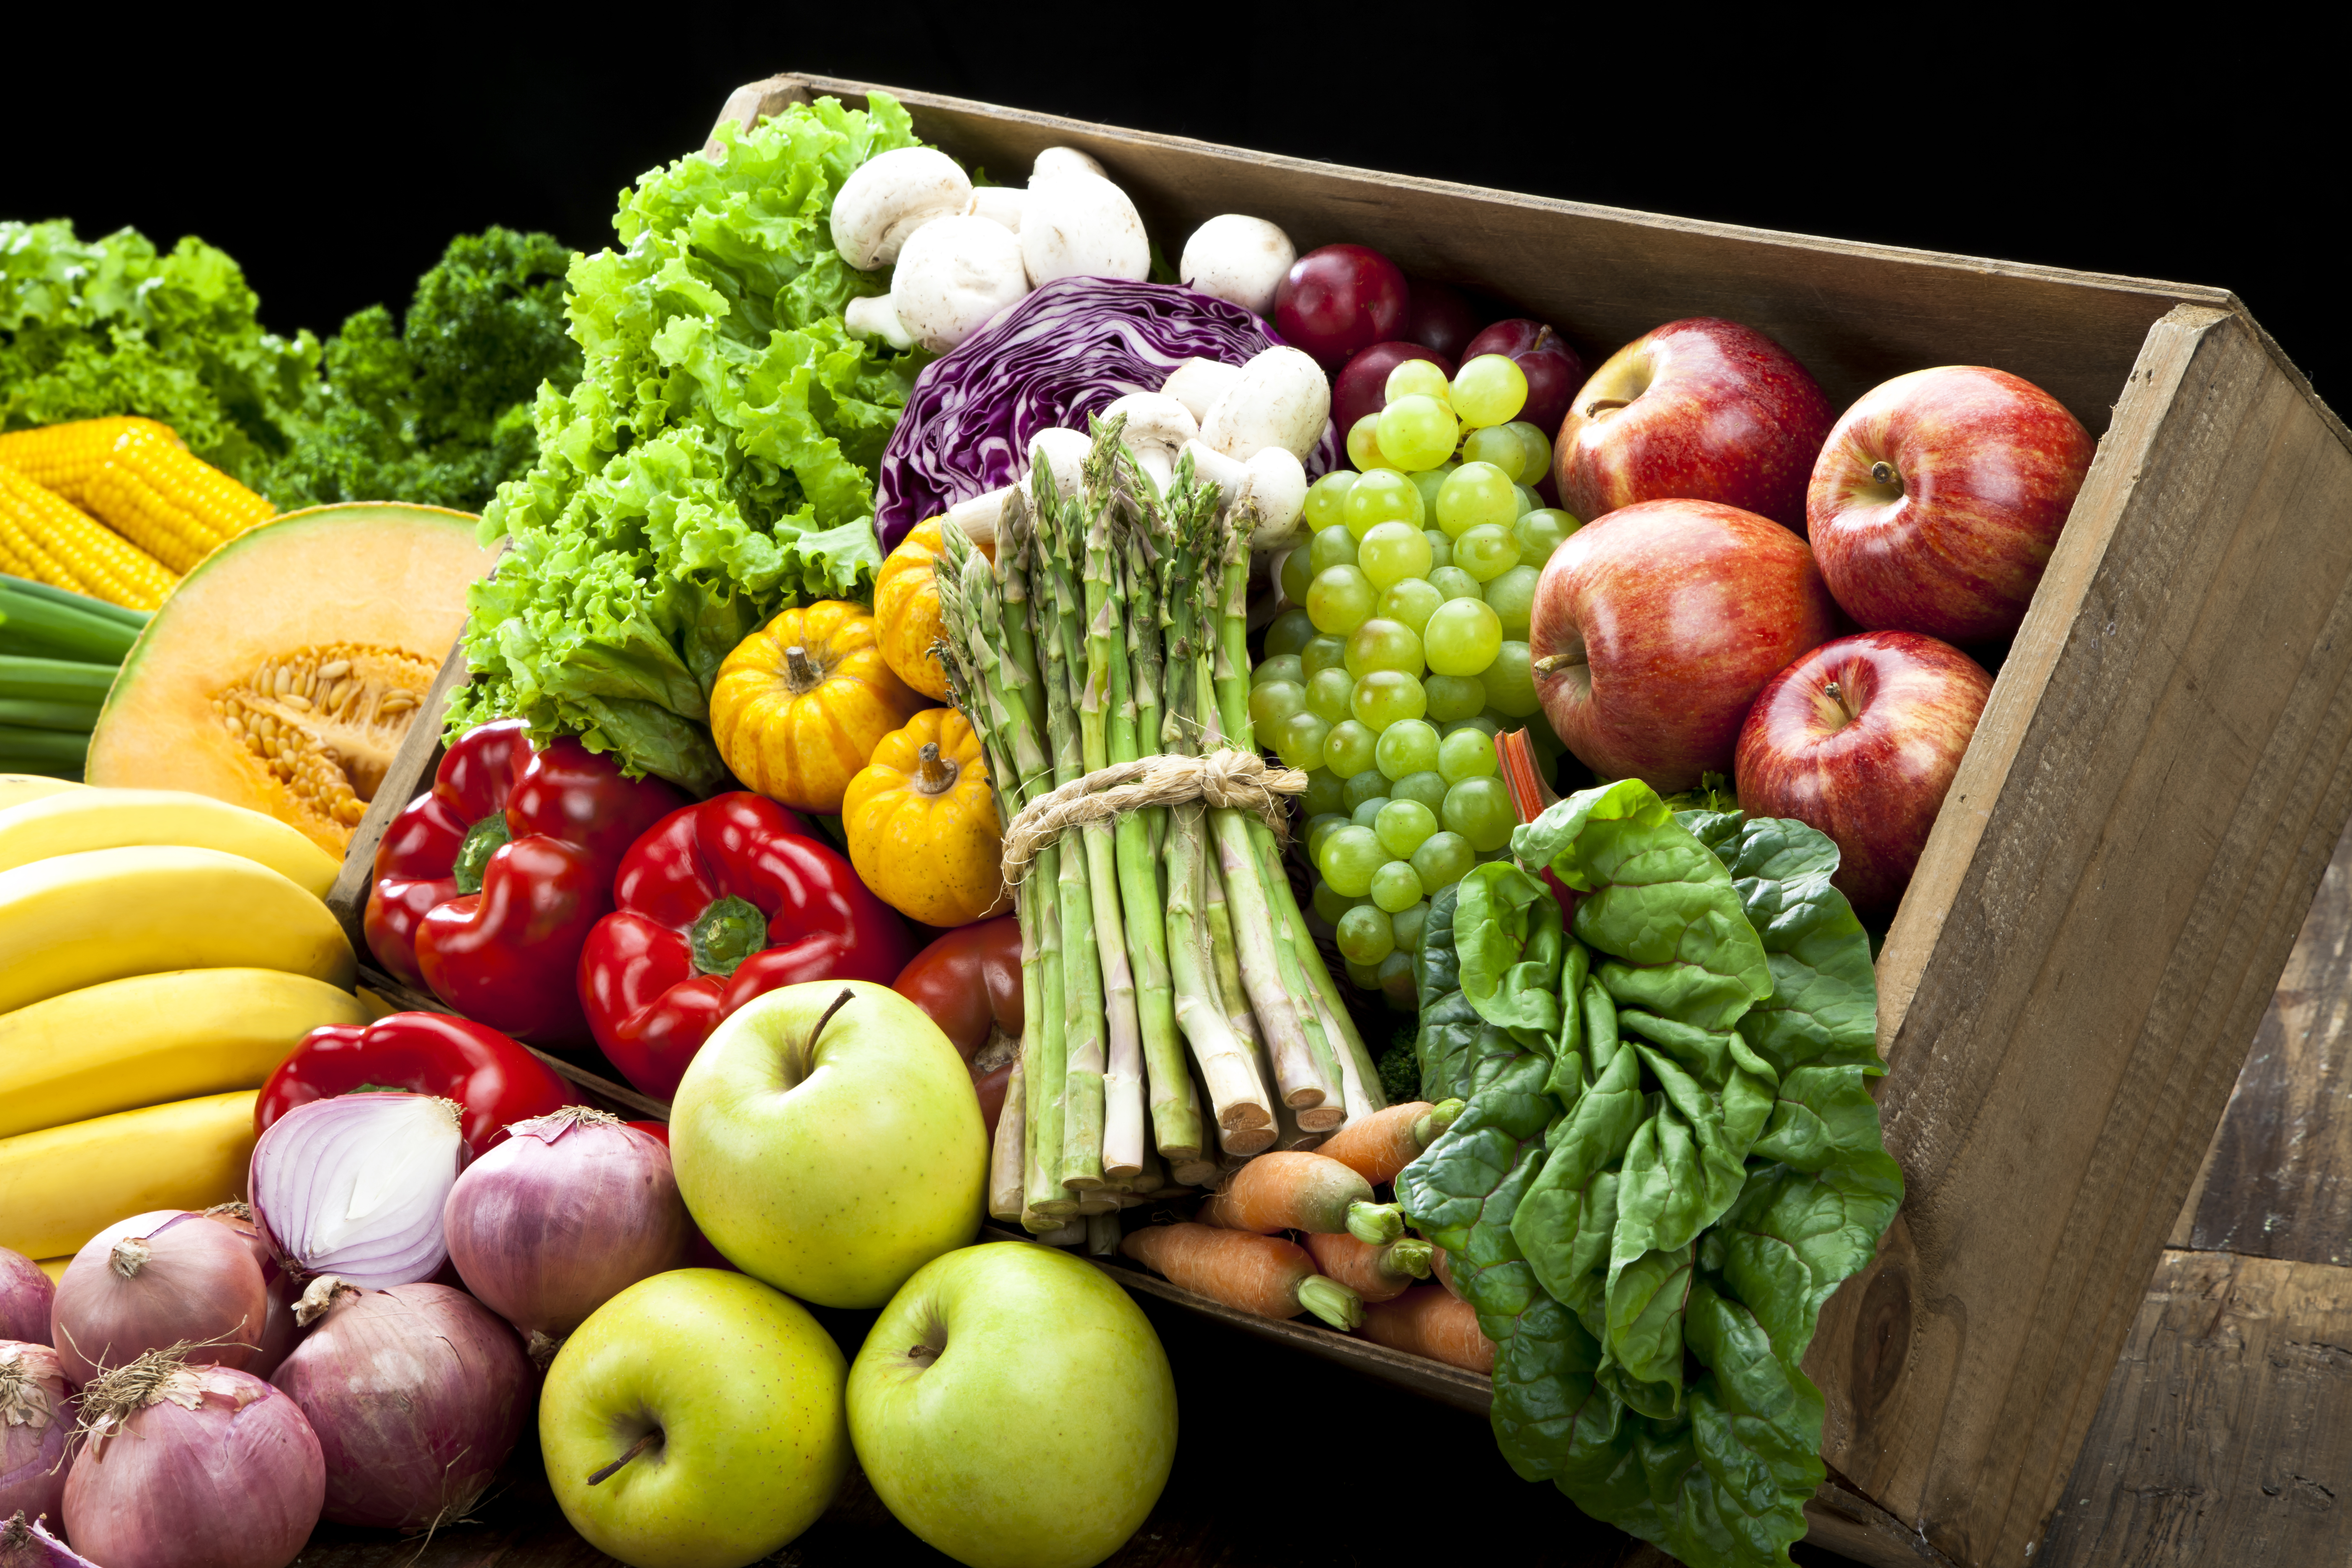 5 Fruits and Veggies Per Day Can Lower Your Risk of Death | Time